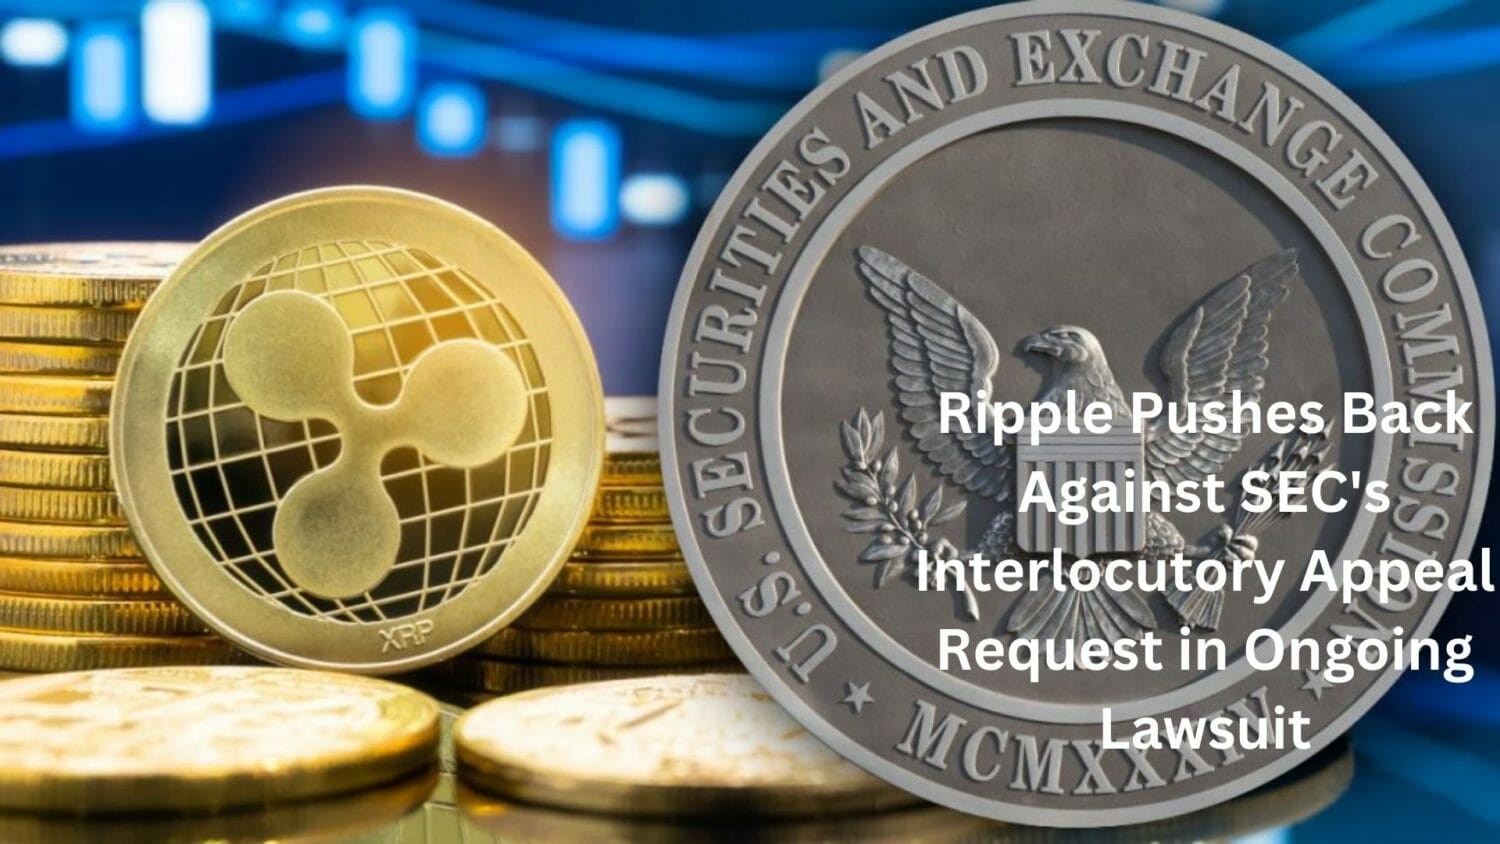 Ripple Pushes Back Against Sec'S Interlocutory Appeal Request In Ongoing Lawsuit